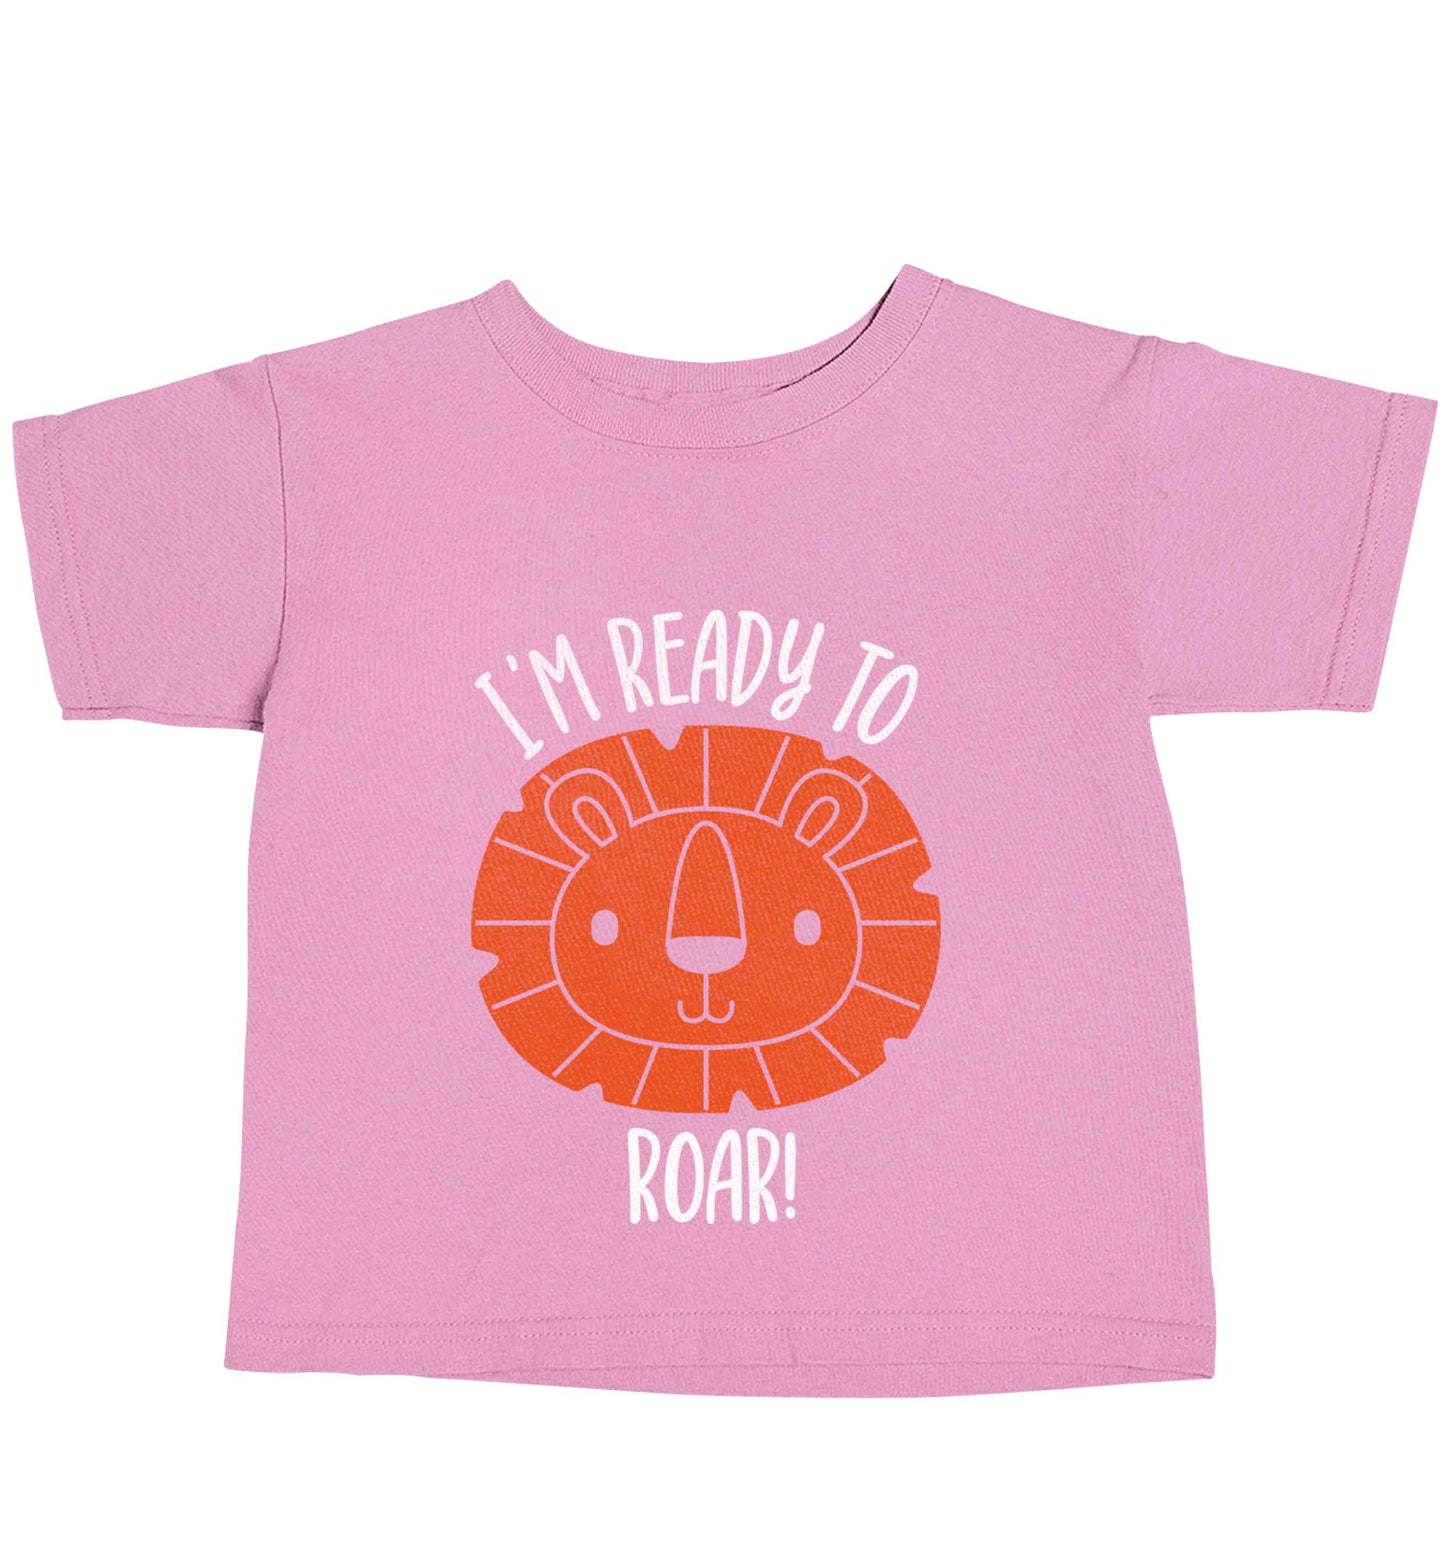 I'm ready to rawr light pink baby toddler Tshirt 2 Years